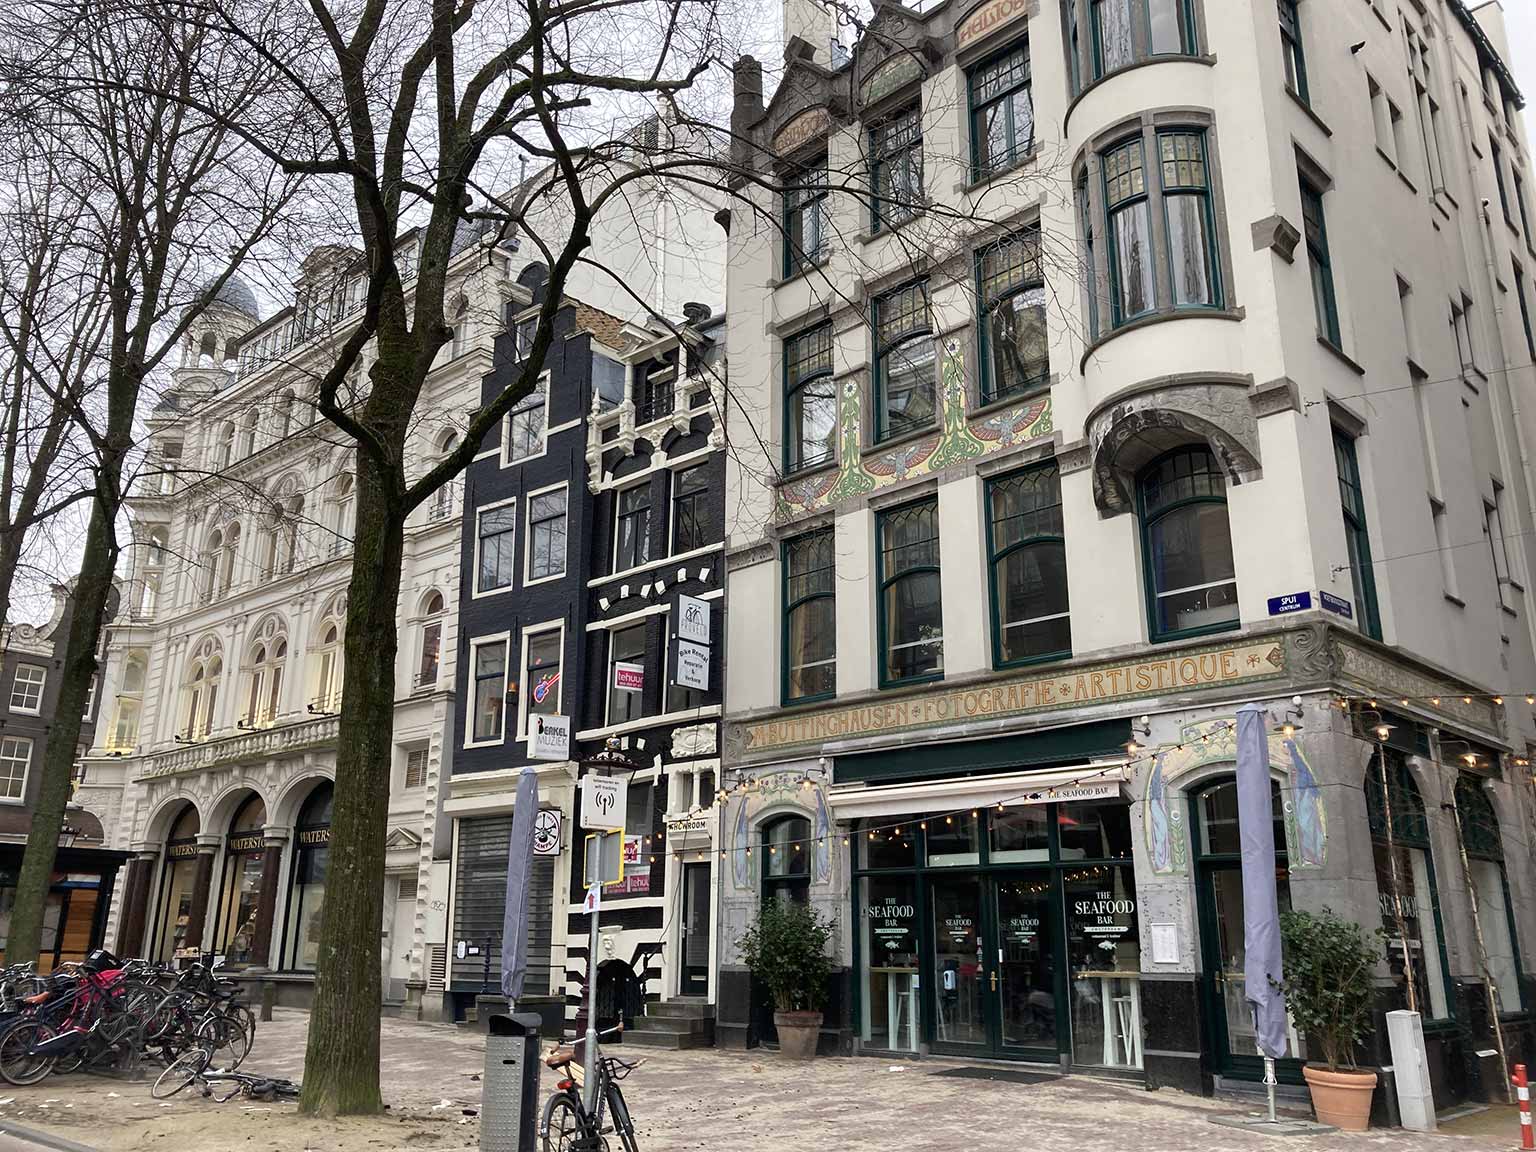 Helios building from 1900 in Art Nouveau style at Spui 15-19